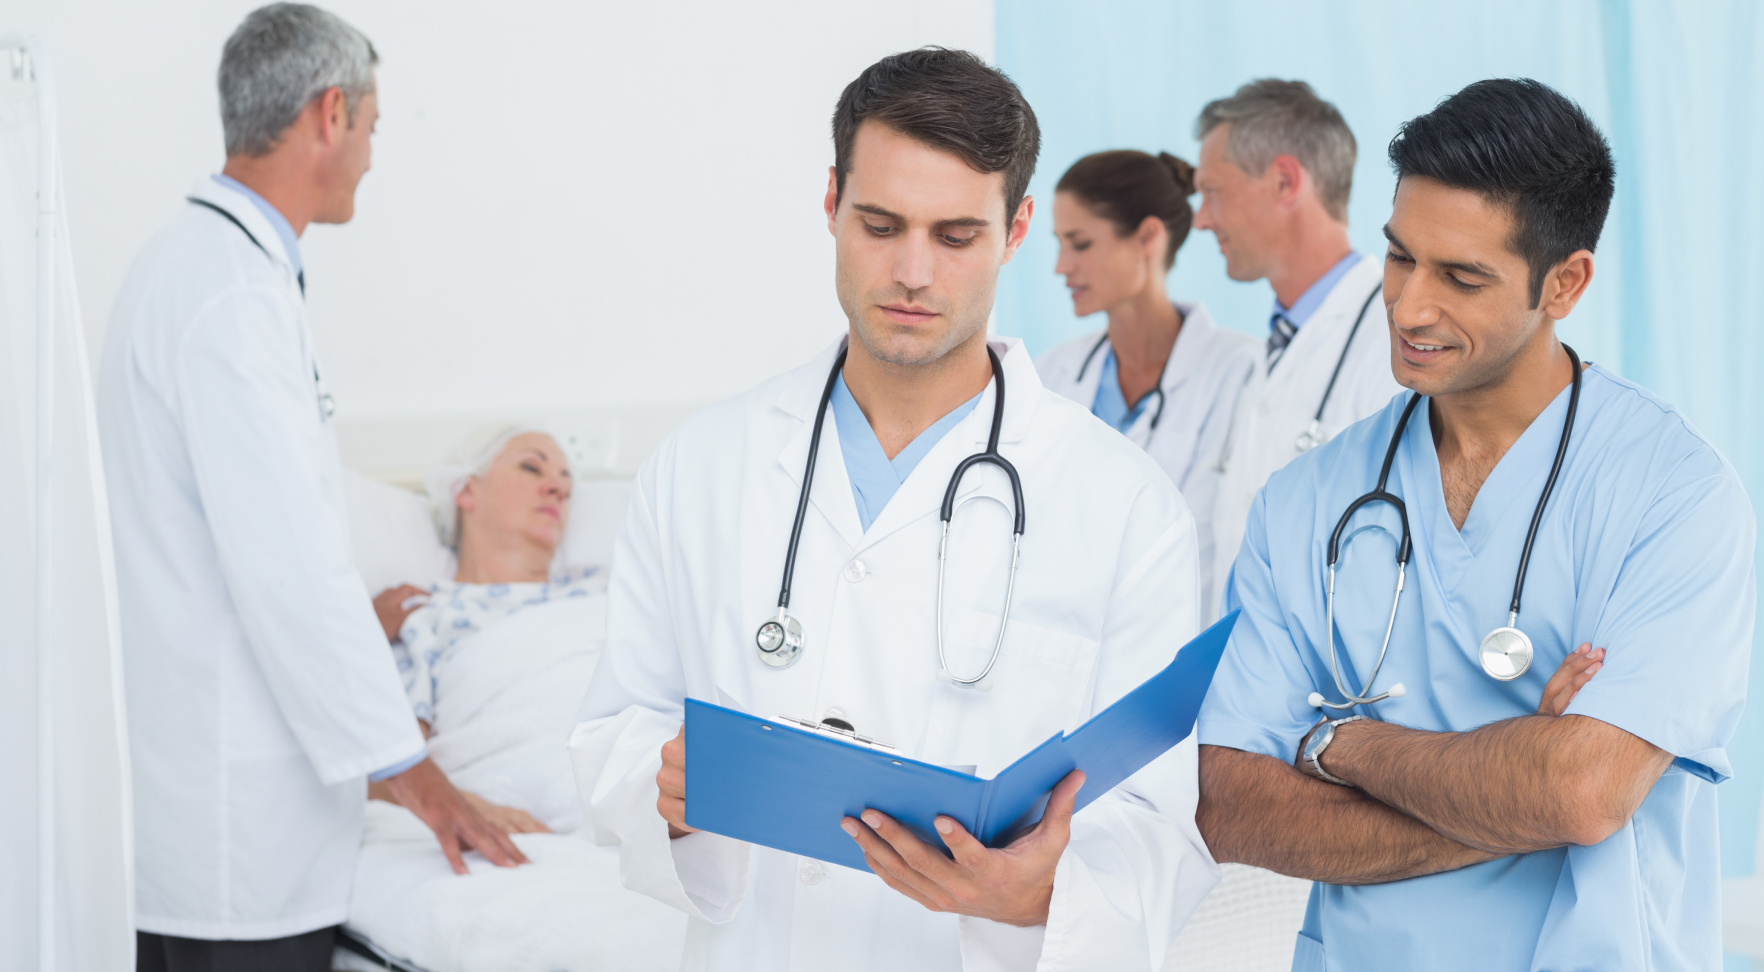 How can group practices proactively address patient concerns to prevent negative reviews?